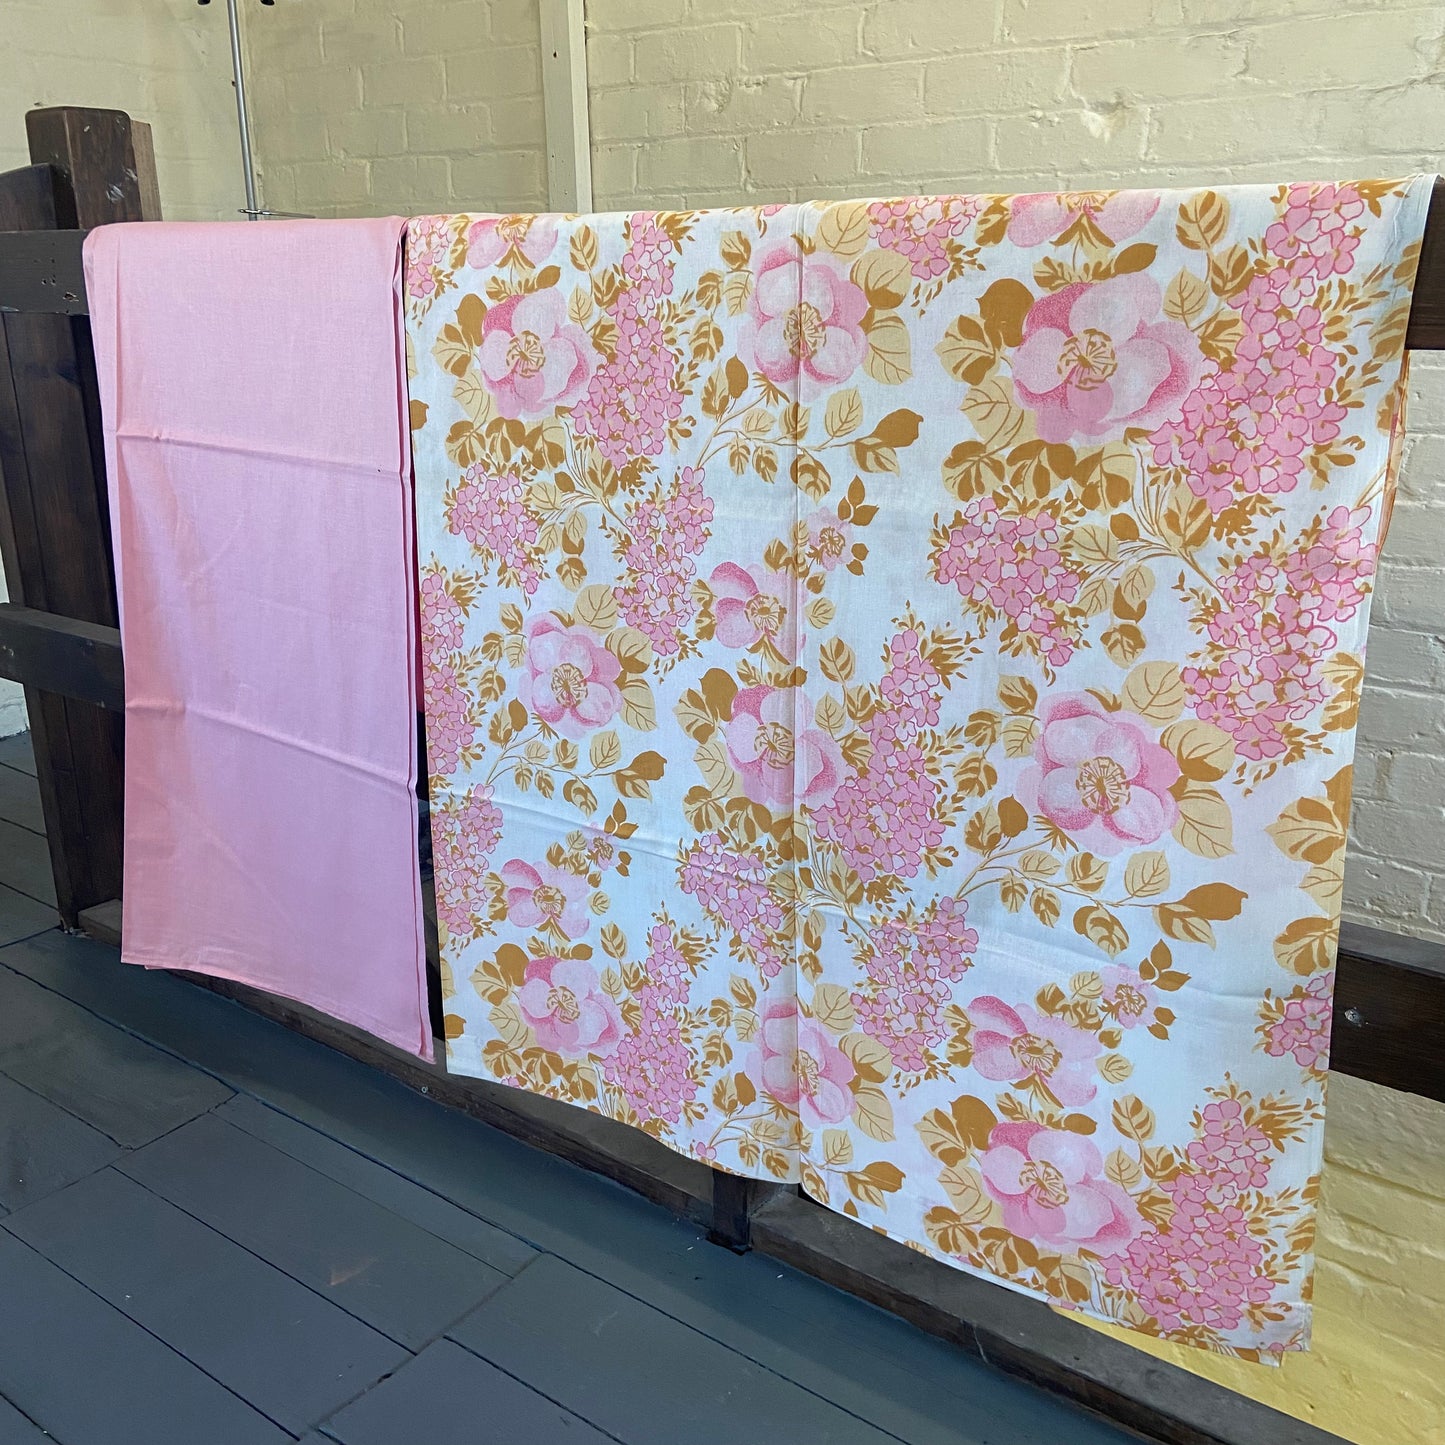 1960s Single Pink Floral Bed Sheet and Pillowcase Set